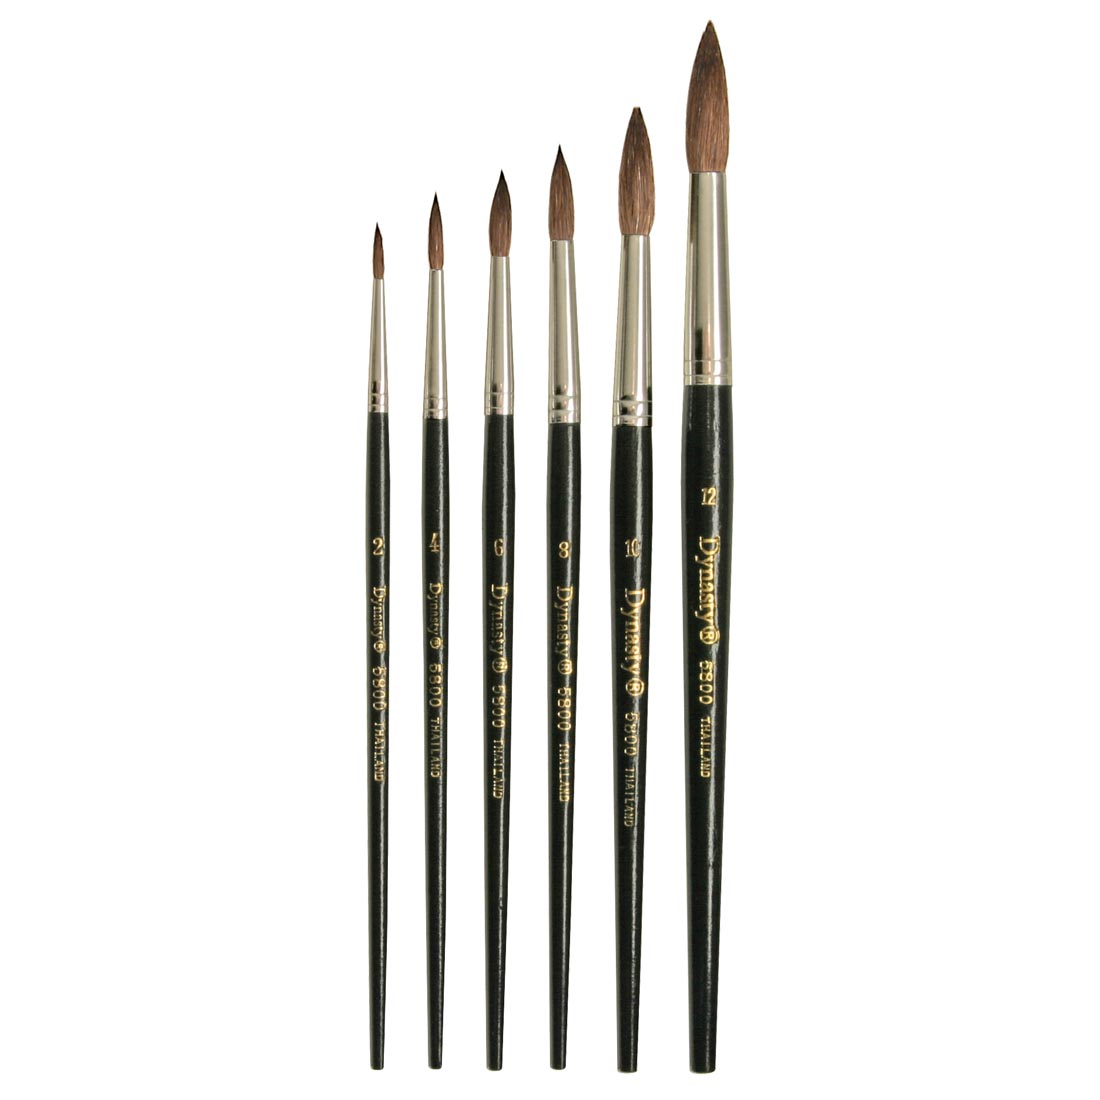 The six sizes of brushes included in the Dynasty Camel Brush Value Pack